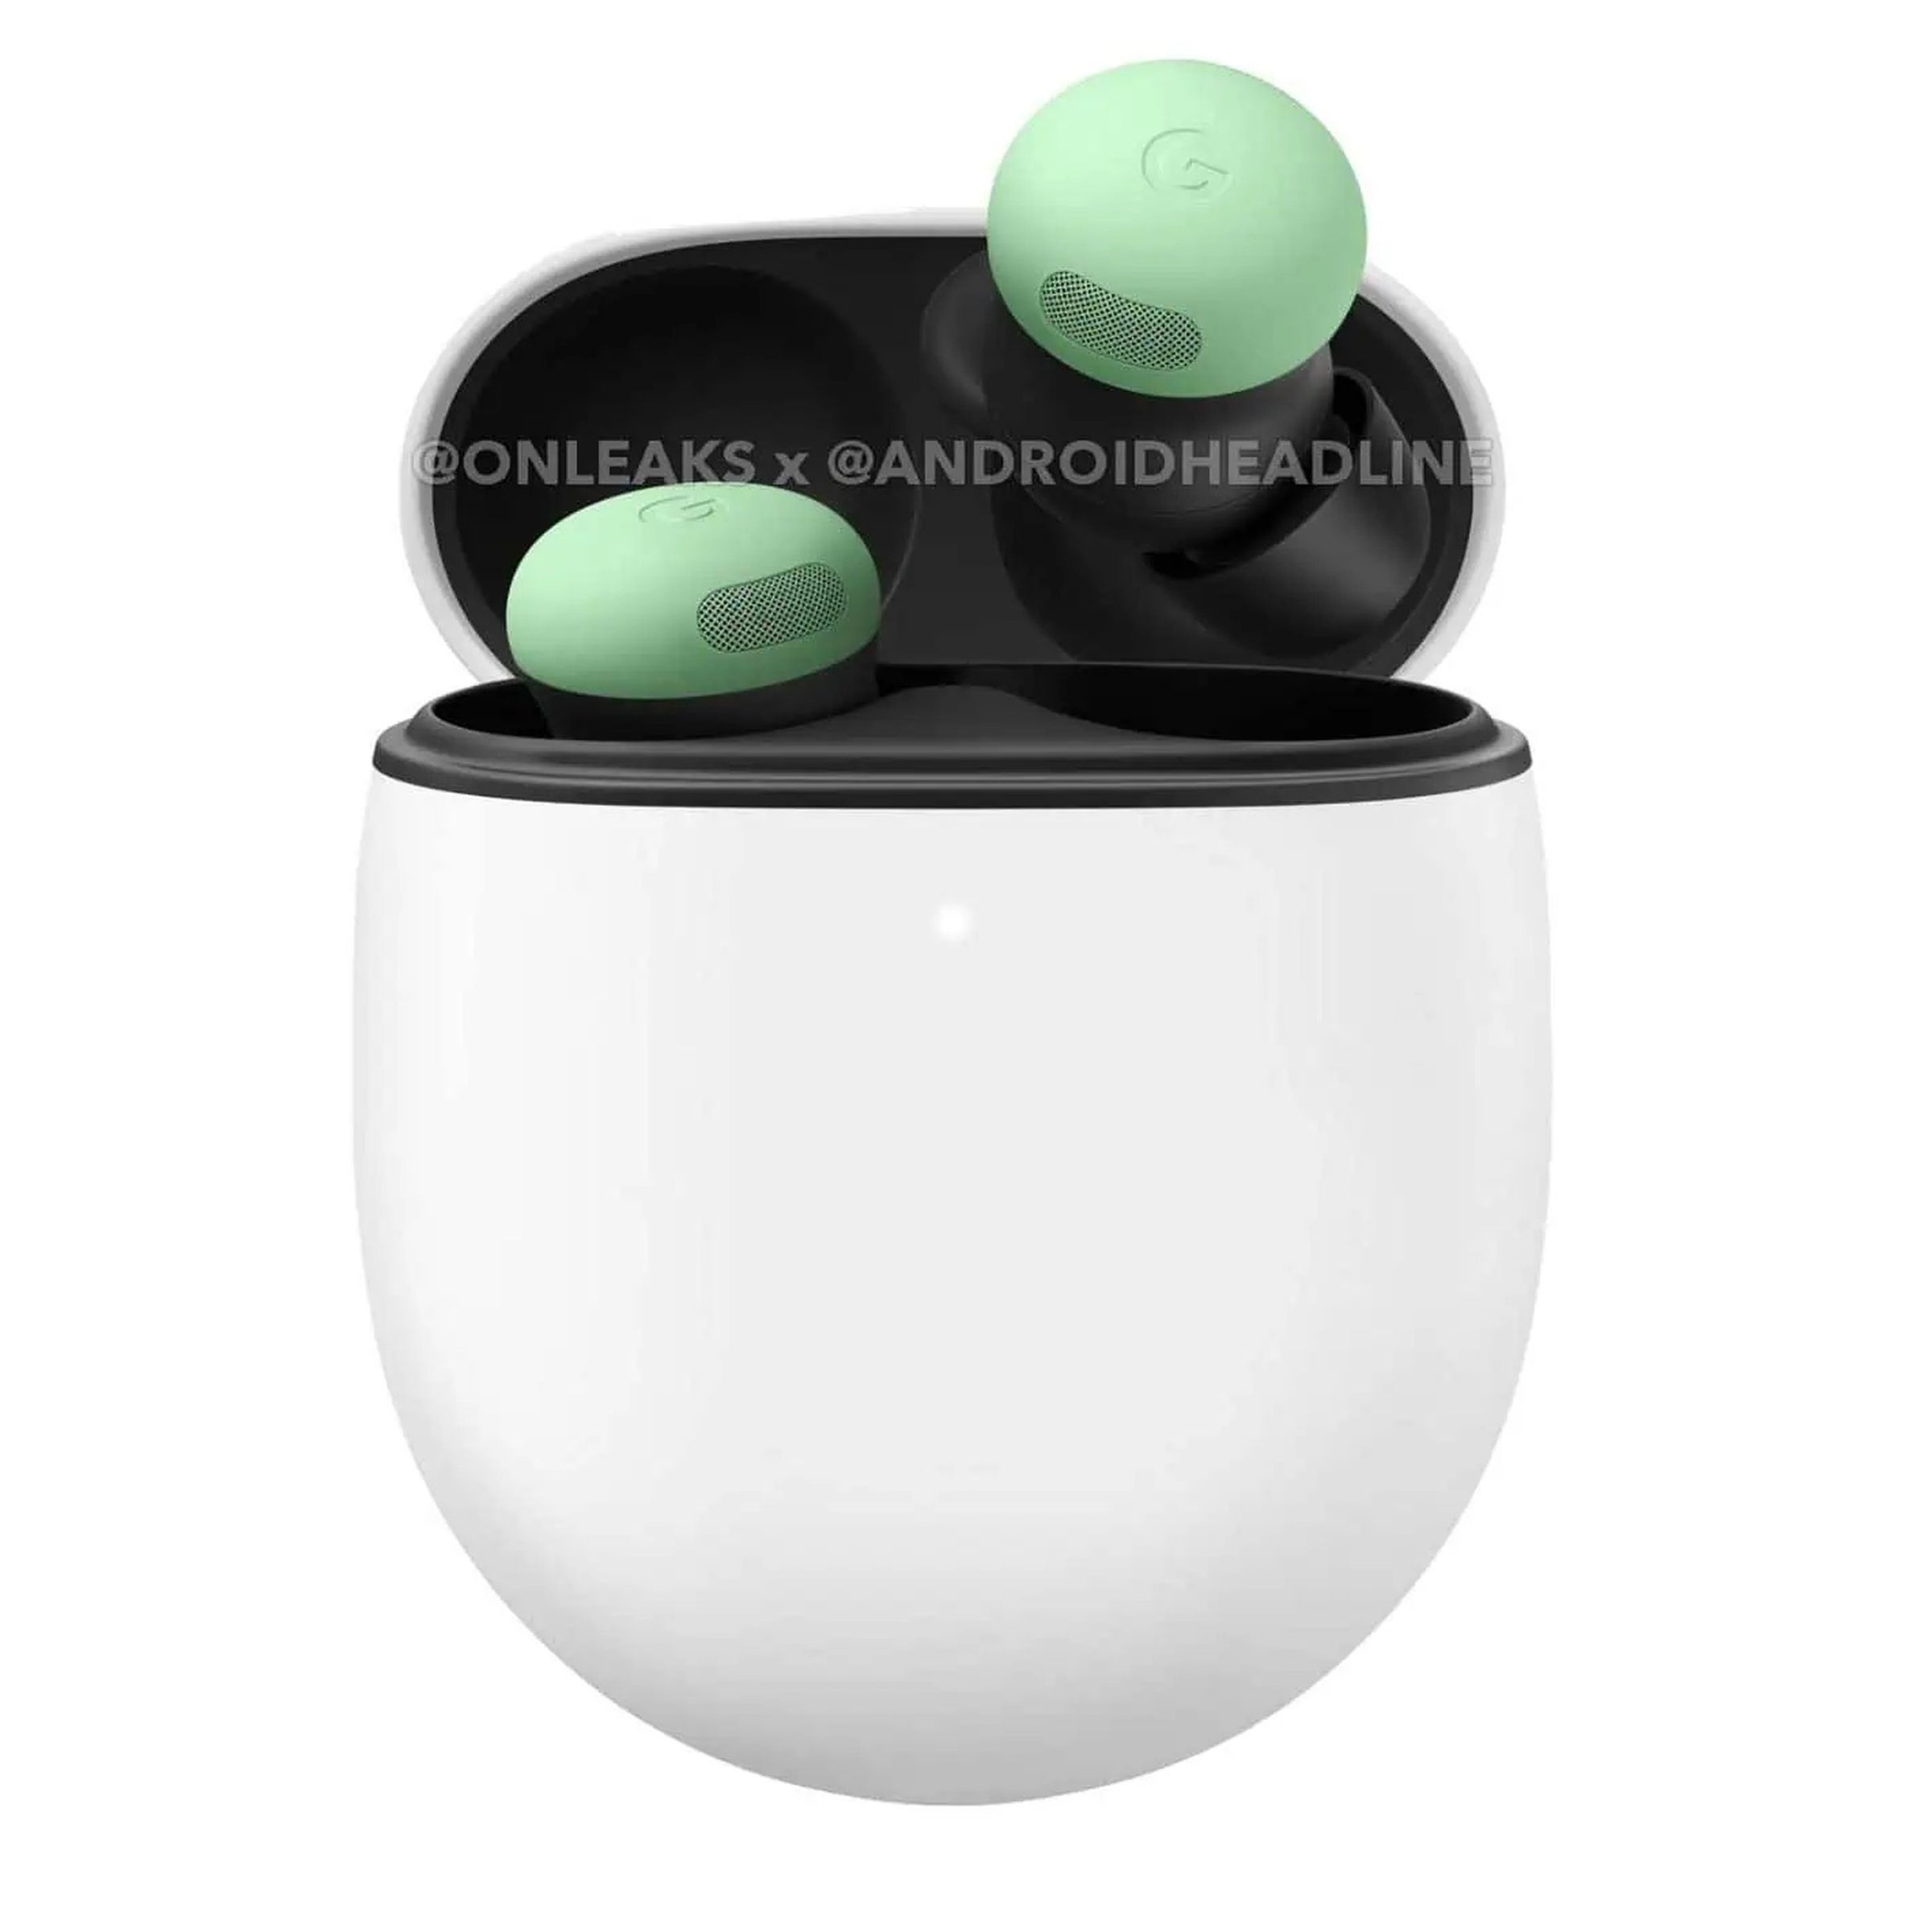 A photo of what appears to be the Pixel Buds Pro 2 in a mint green